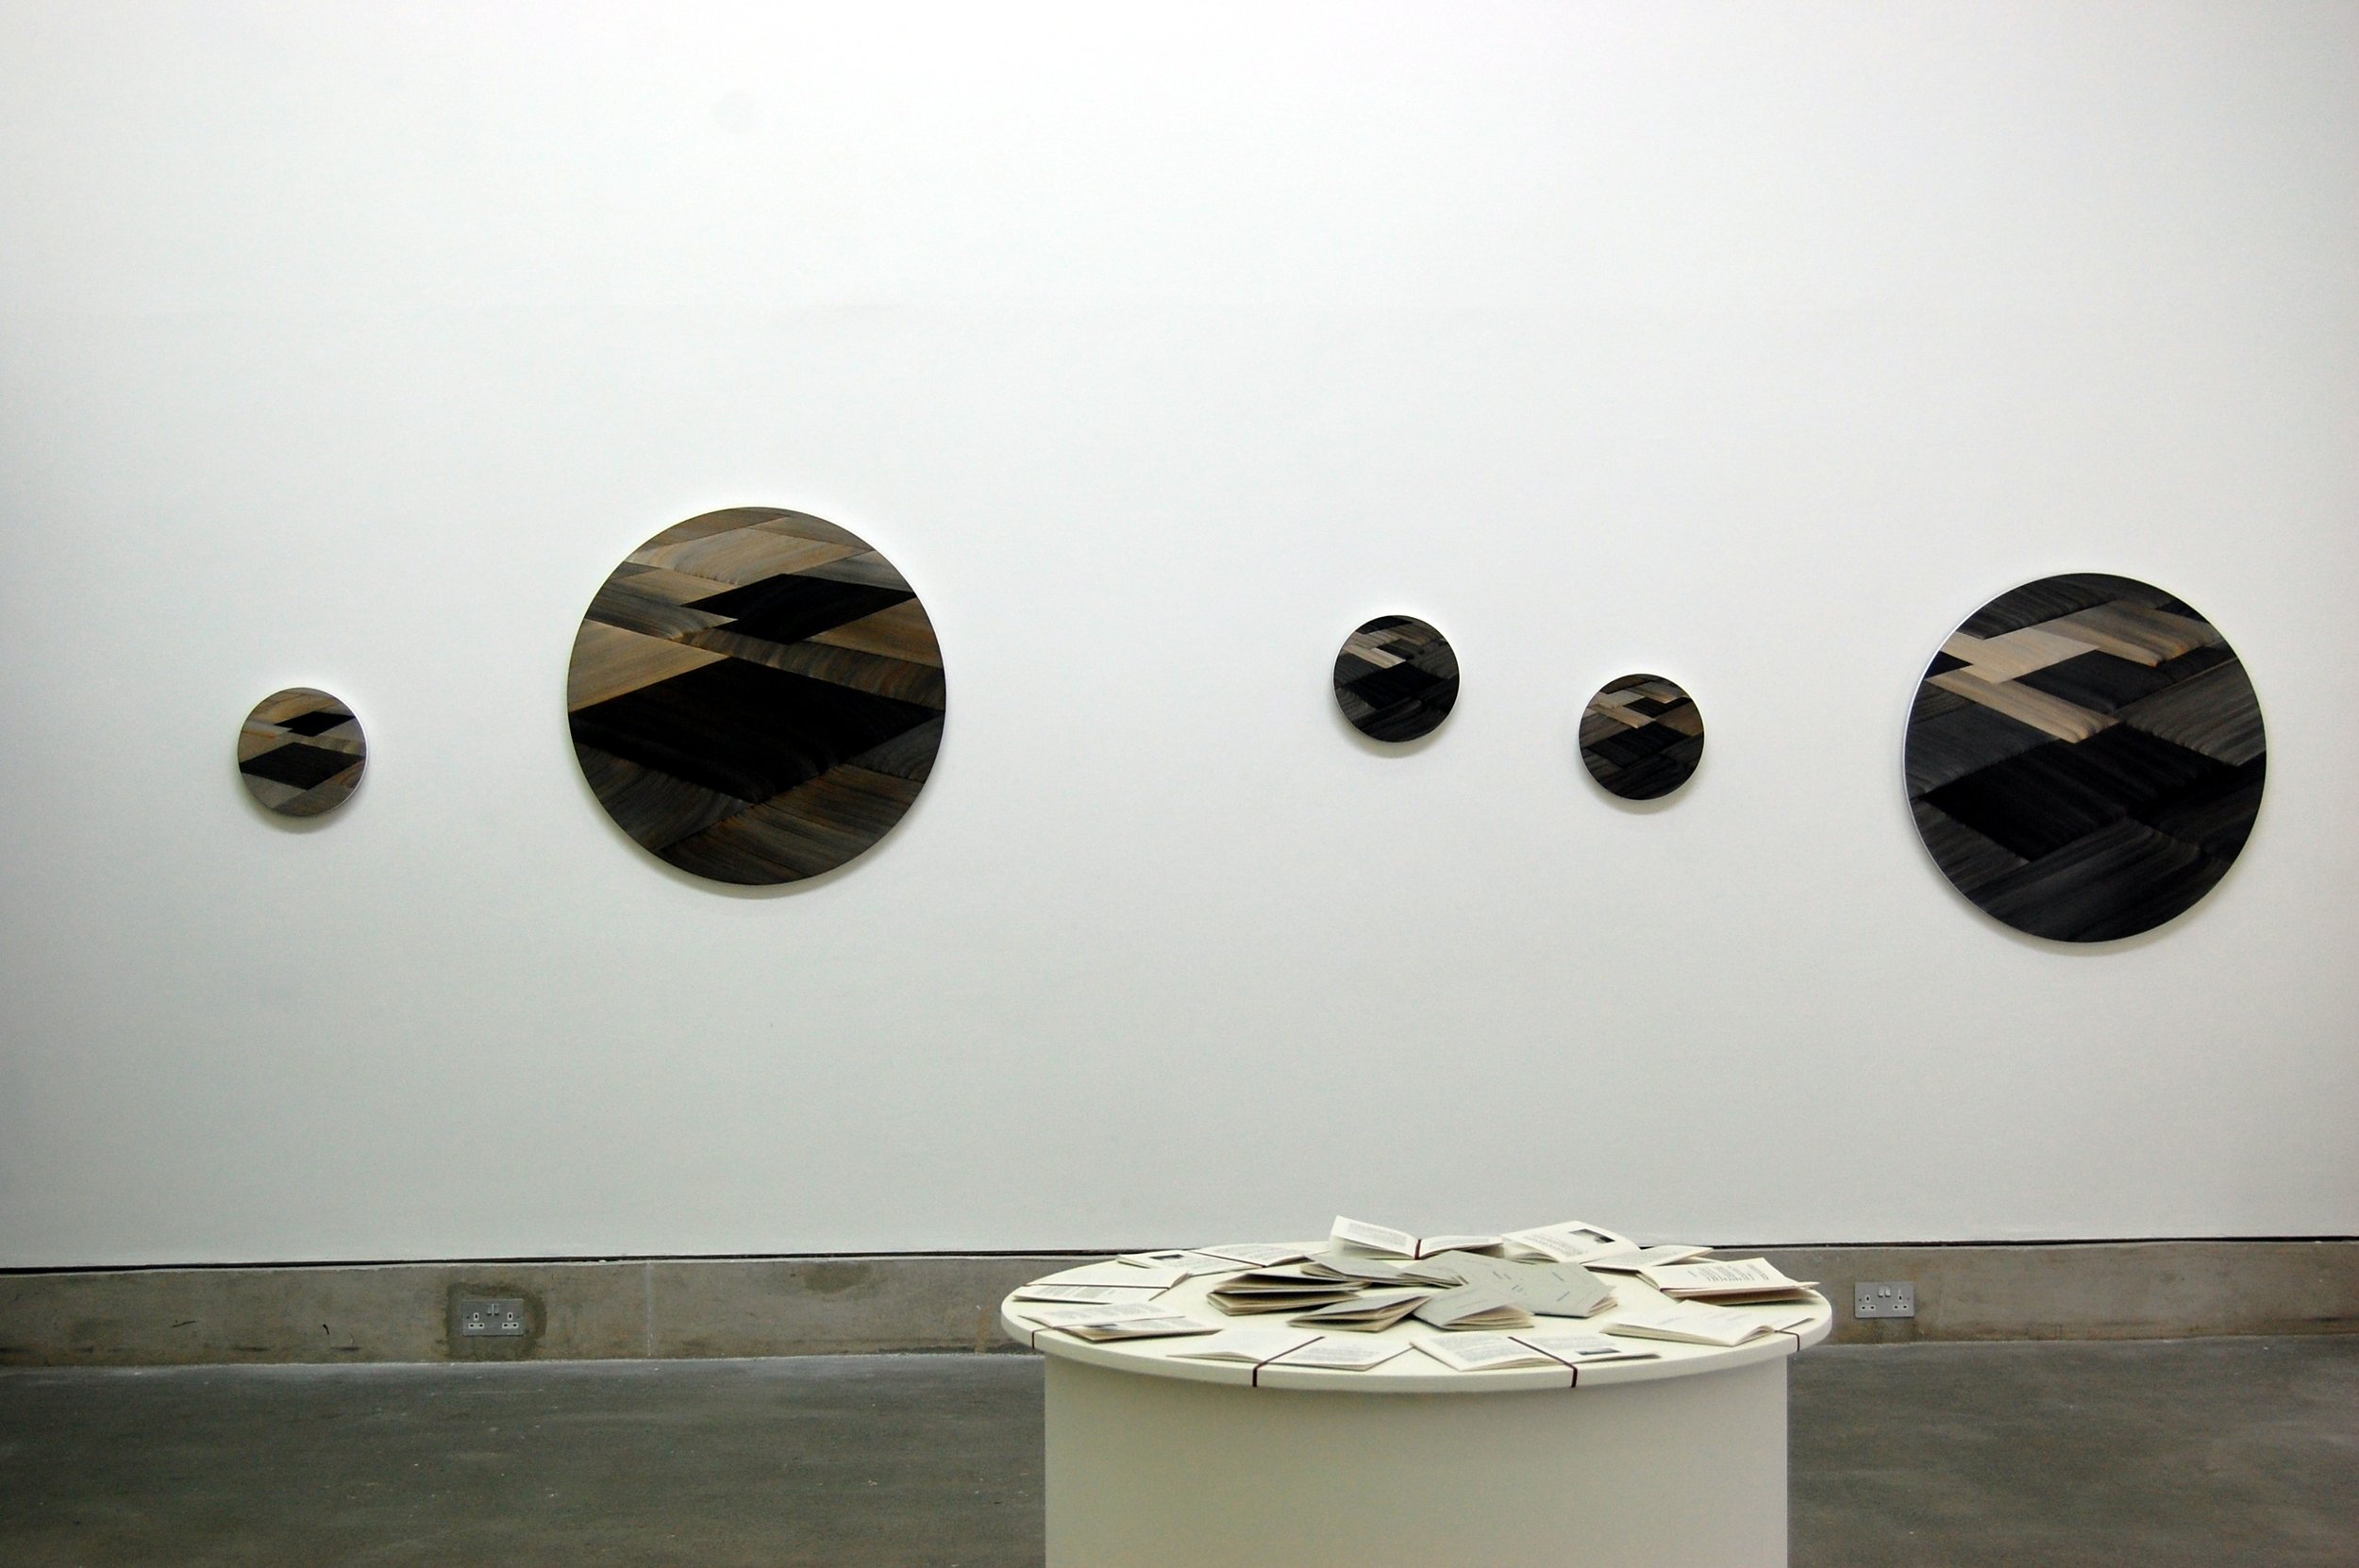  Image of M. B. O’Toole’s circular paintings on the gallery wall and in the foreground, Christine Arnold’s book,  Walking, Dreaming, Thinking: A Book of Reflections.   